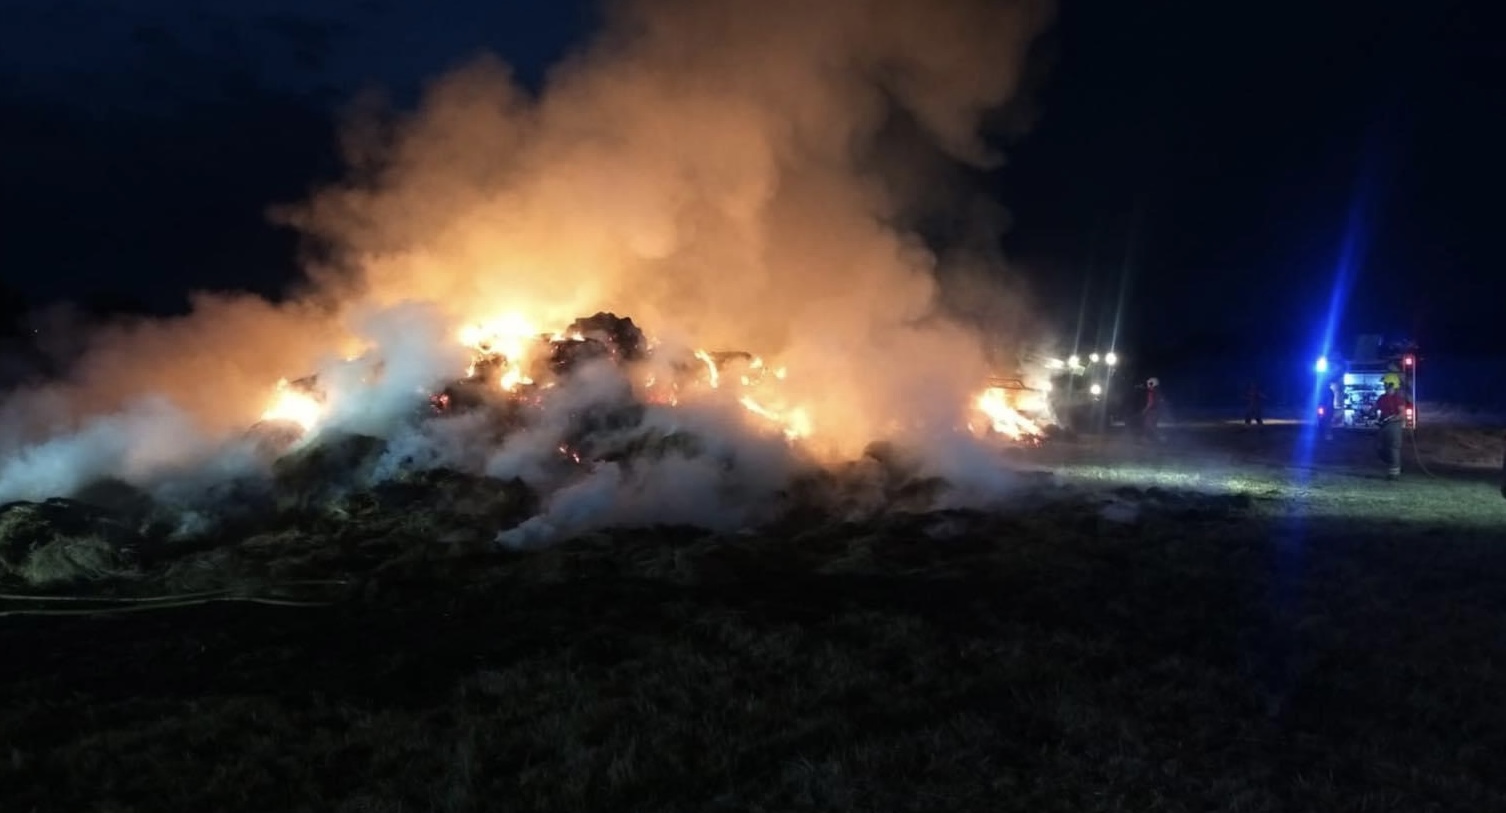 NEWS | Fire crews are tackling a large fire in the open this evening in Herefordshire